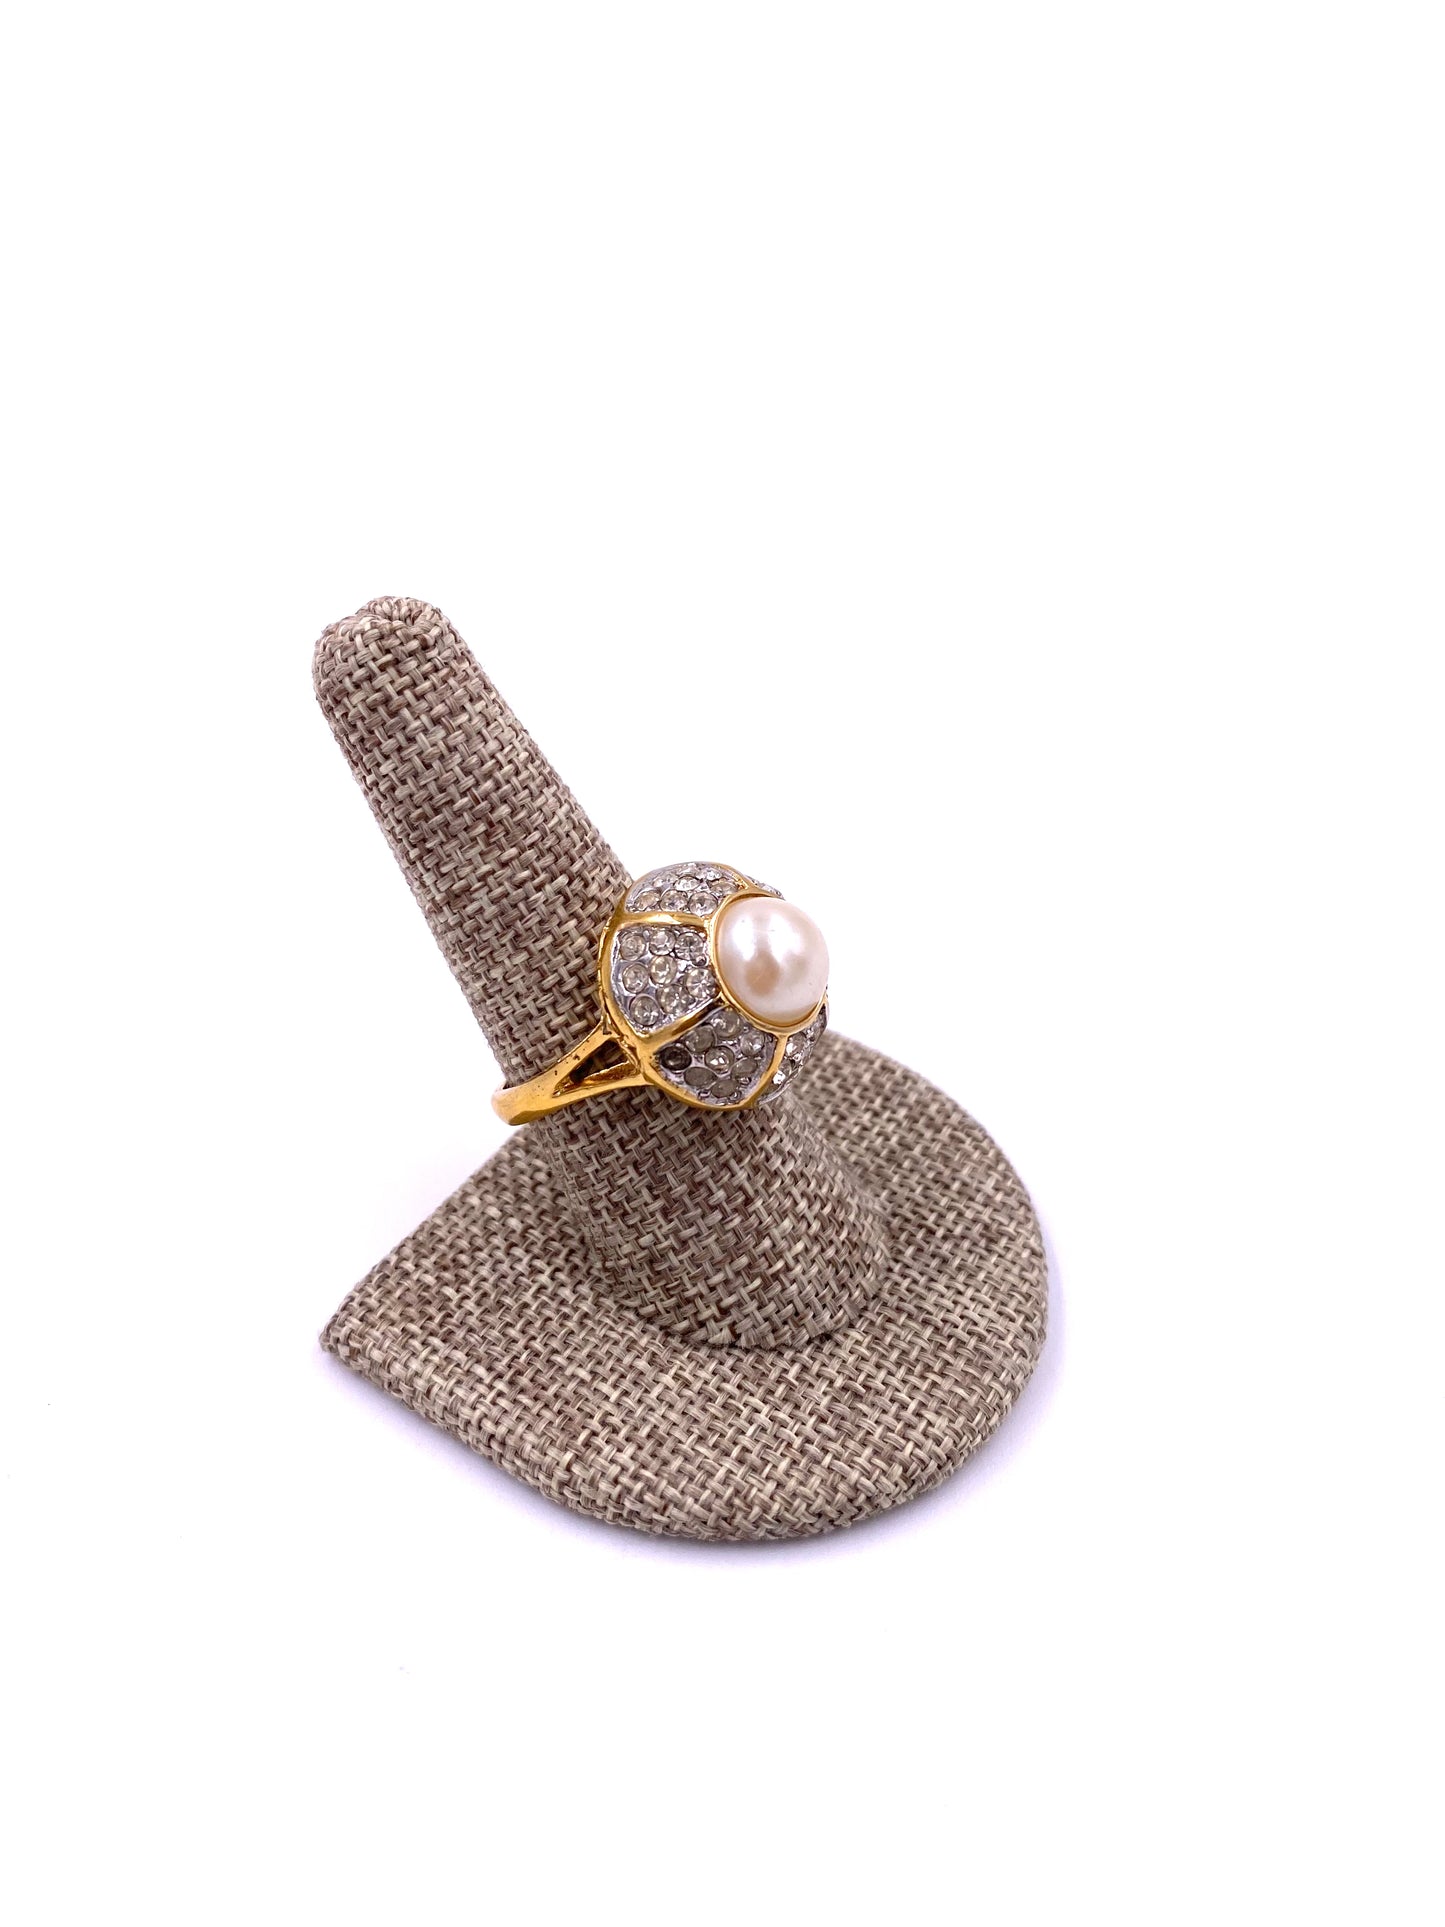 Pearl Dome Cocktail Ring